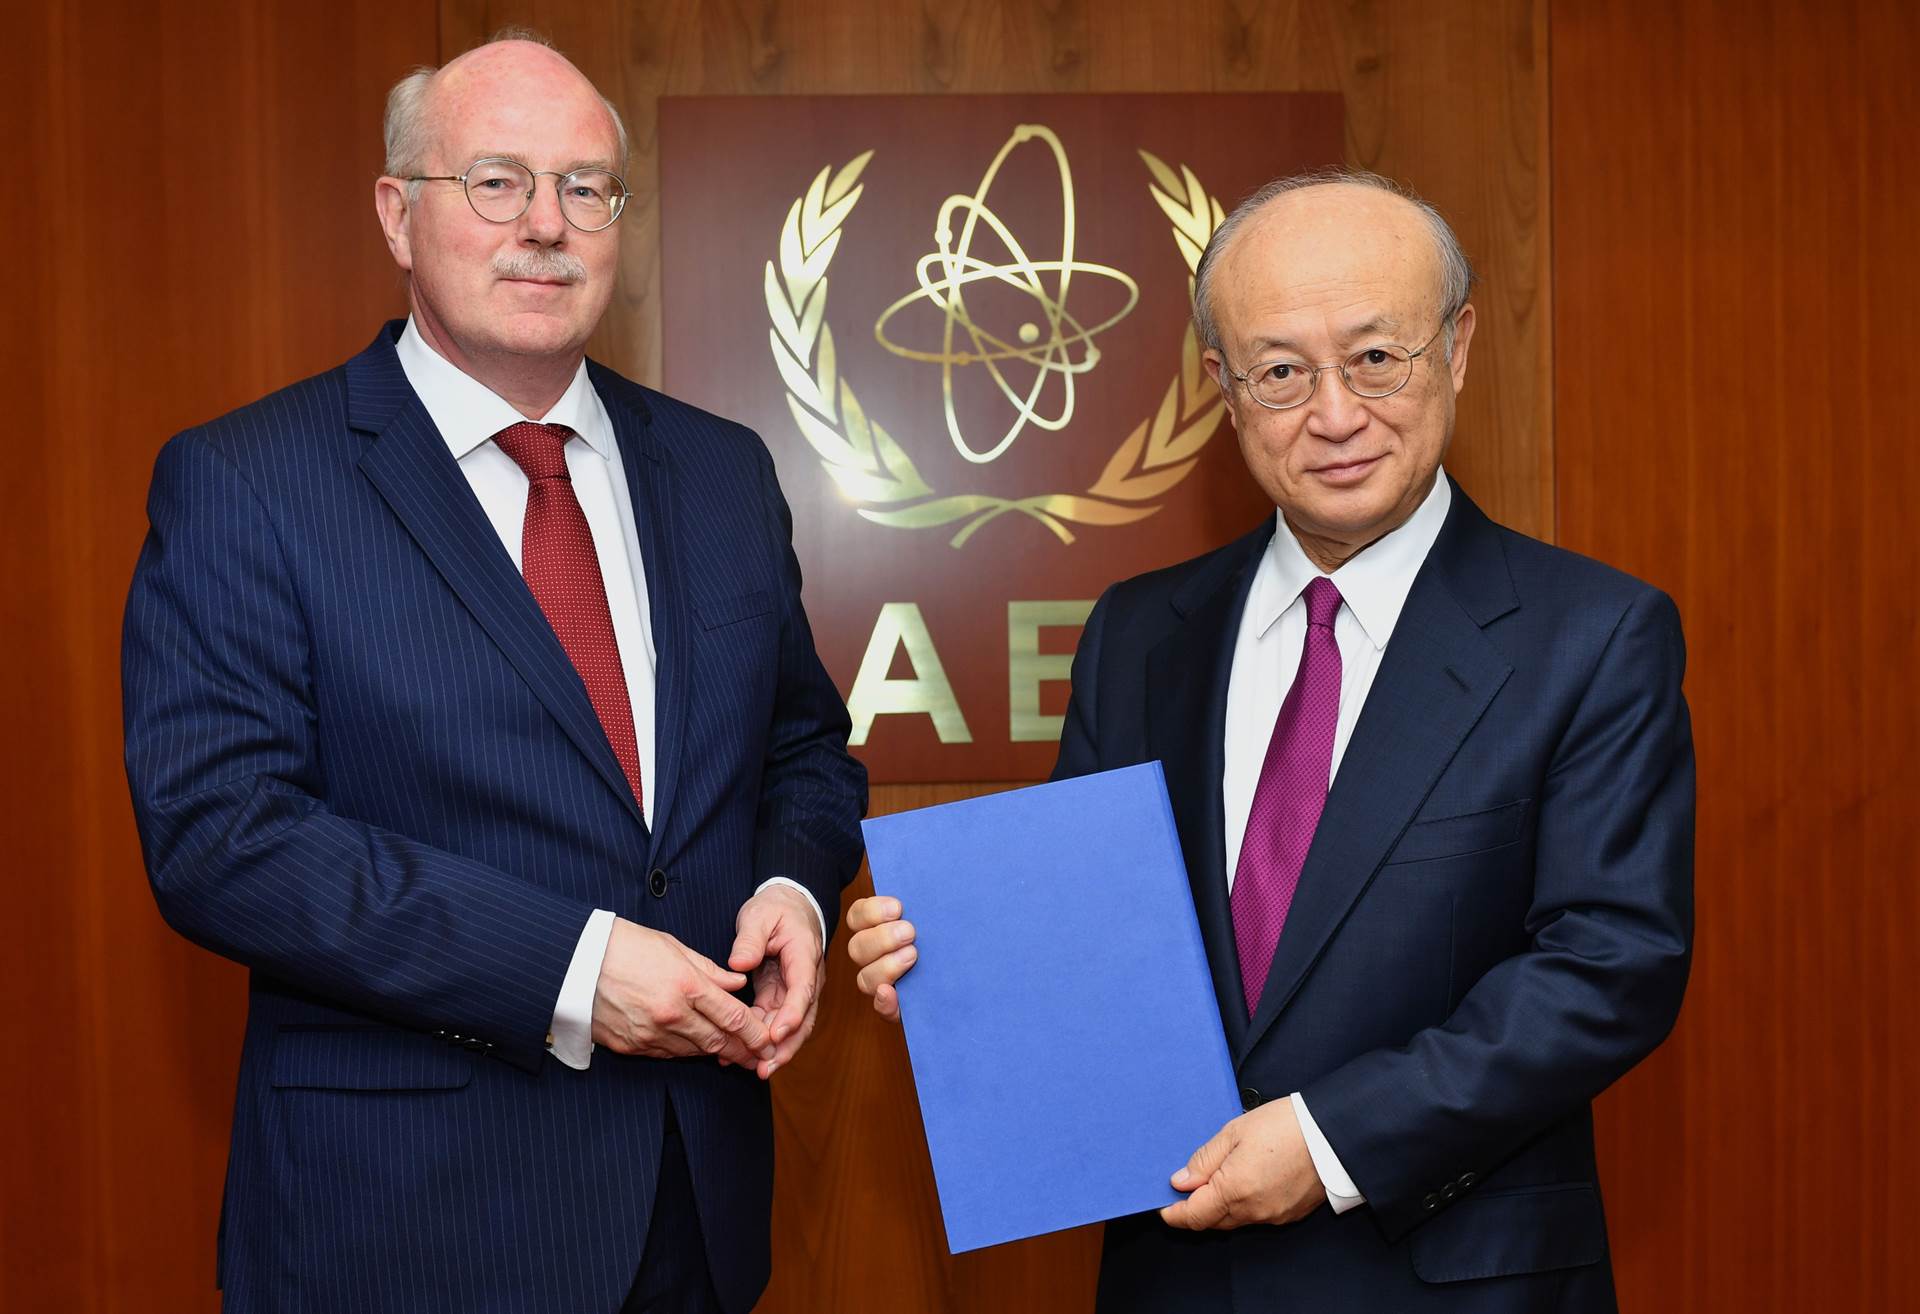 Presentation of Letter of Credence to the International Atomic Energy Agency in Vienna (IAEA) - mynd